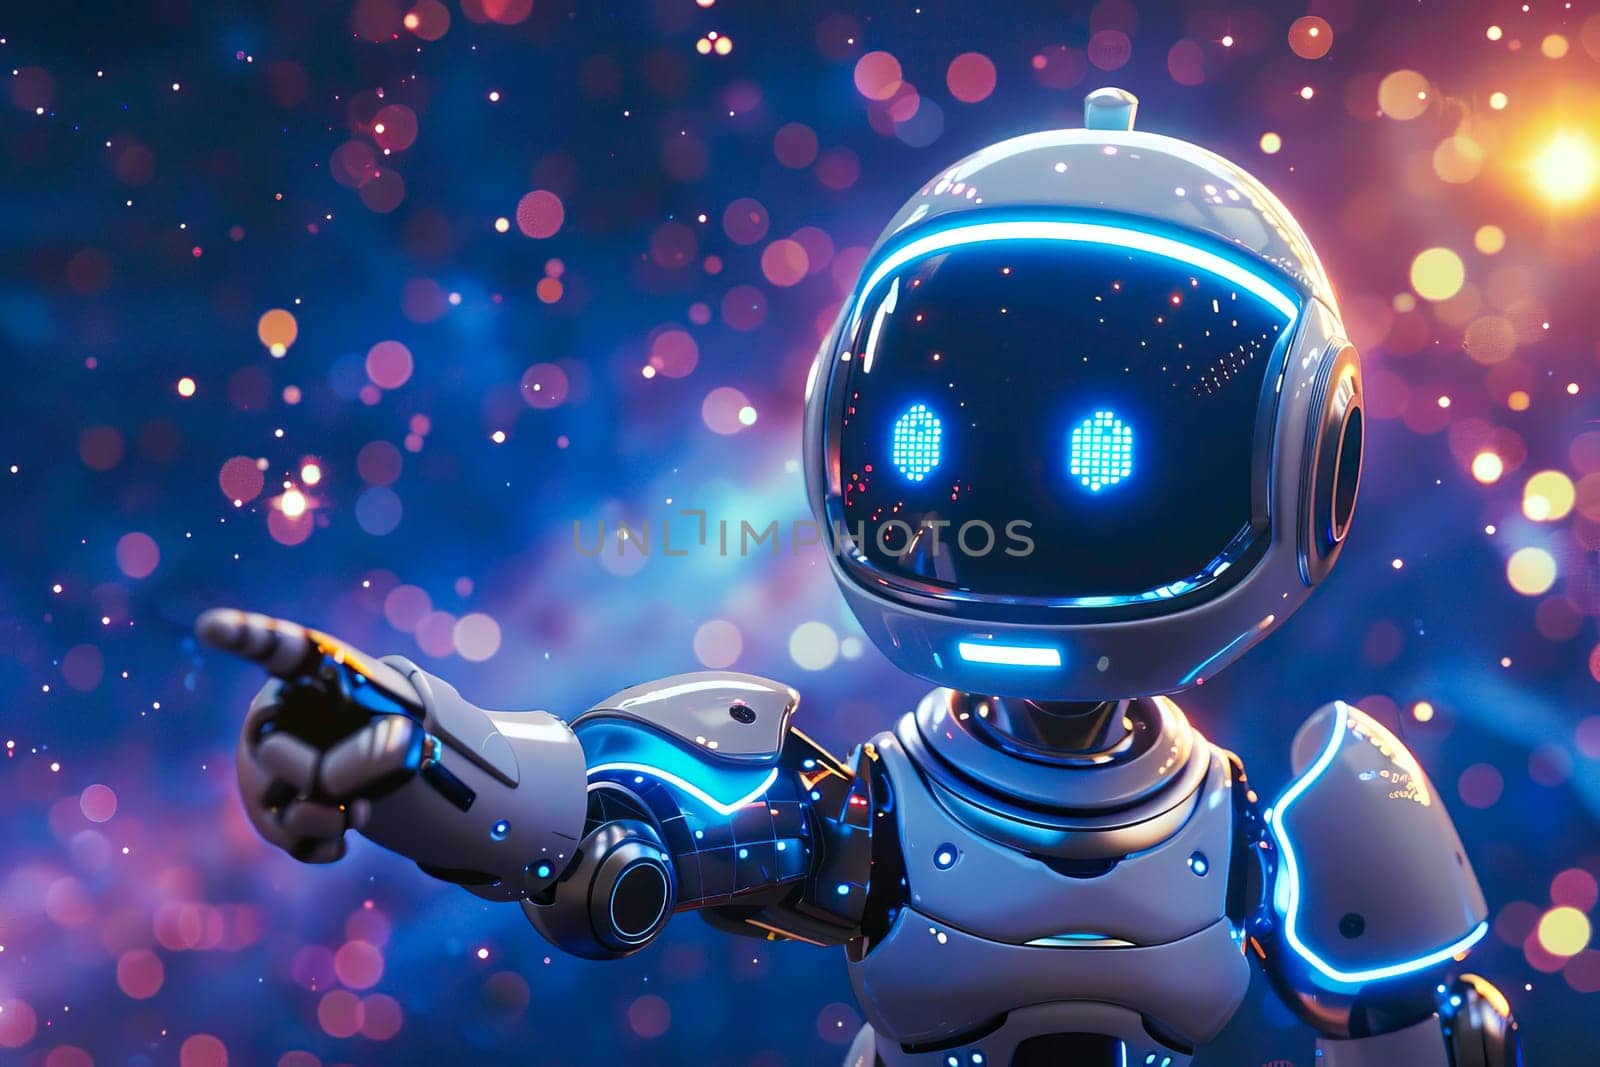 A futuristic robot is pointing at something., showcasing advanced technology and artificial intelligence.